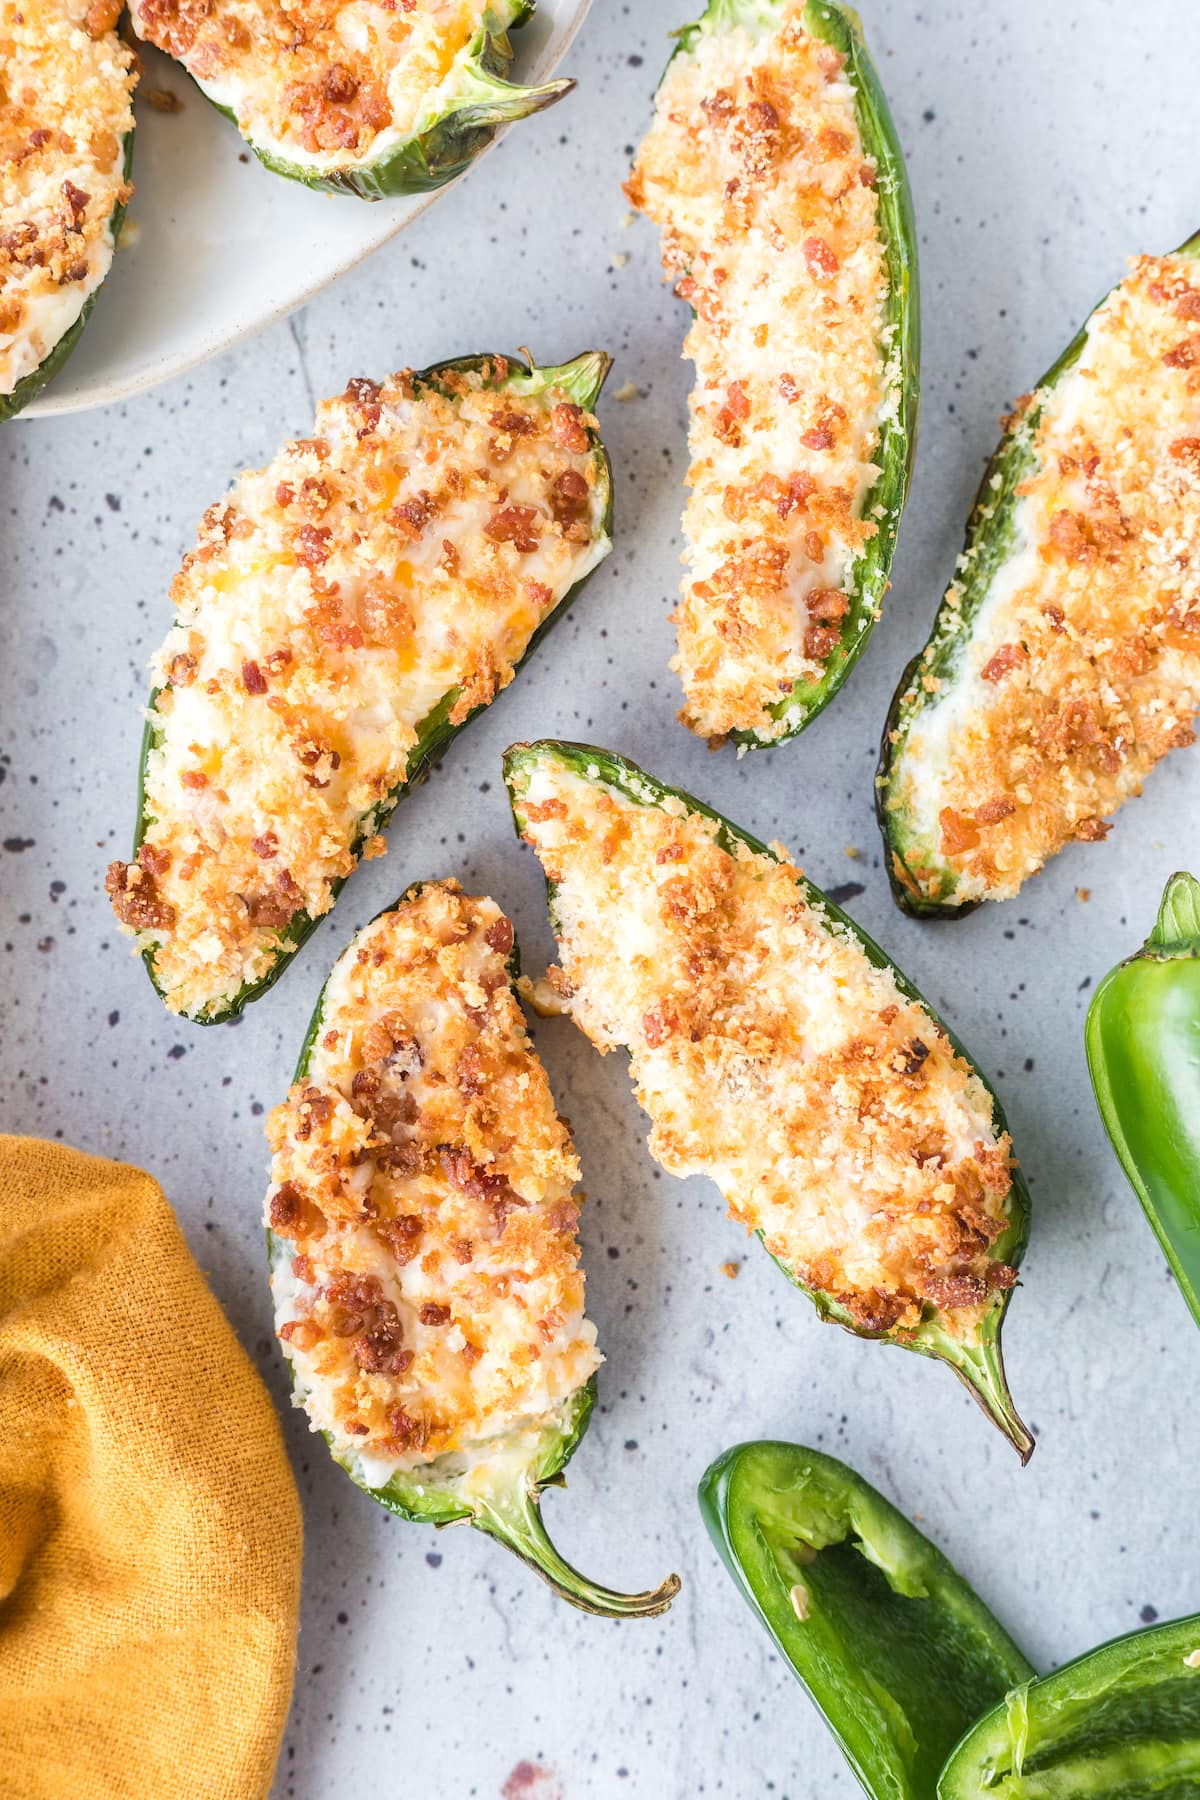 air fried jalapeño peppers sliced in half stuffed with cream cheese mixture and bread crumbs on a speckled plate next to a yellow towel 